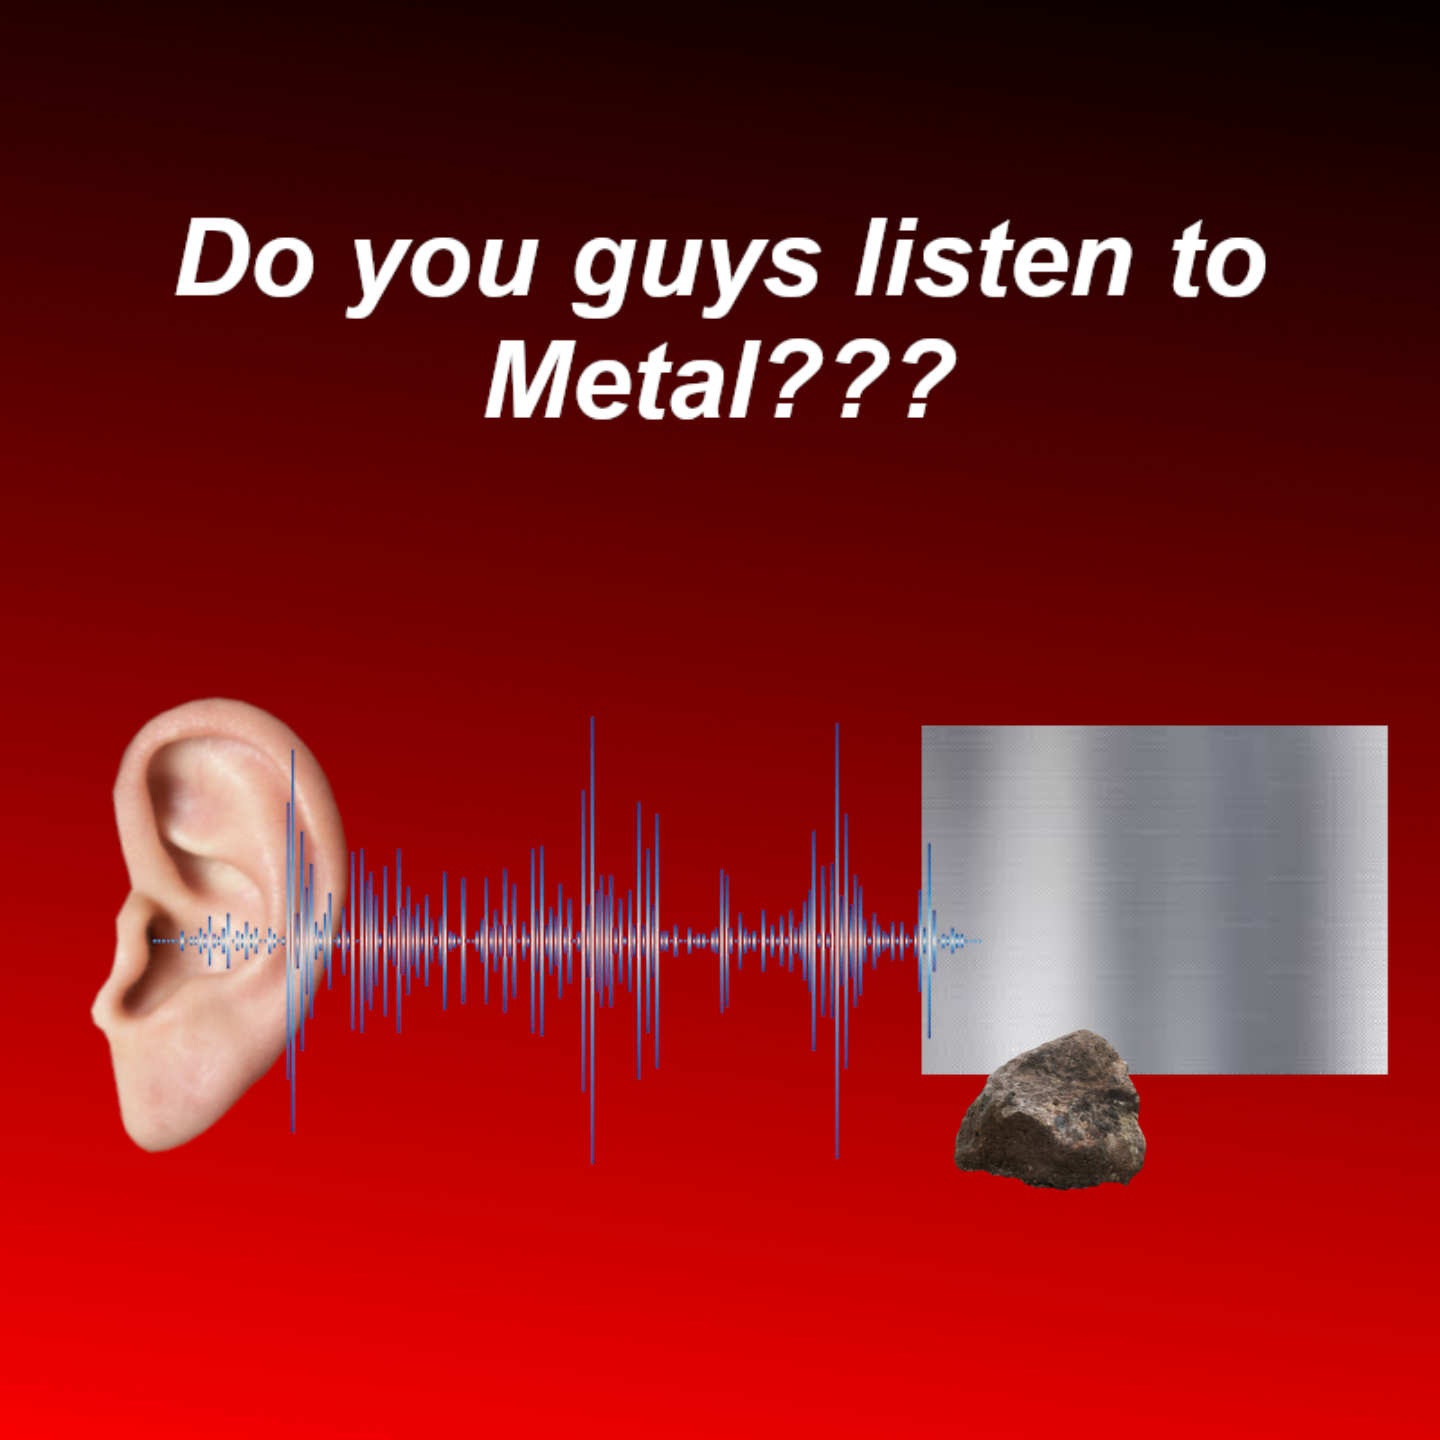 I like my metal with a little rock